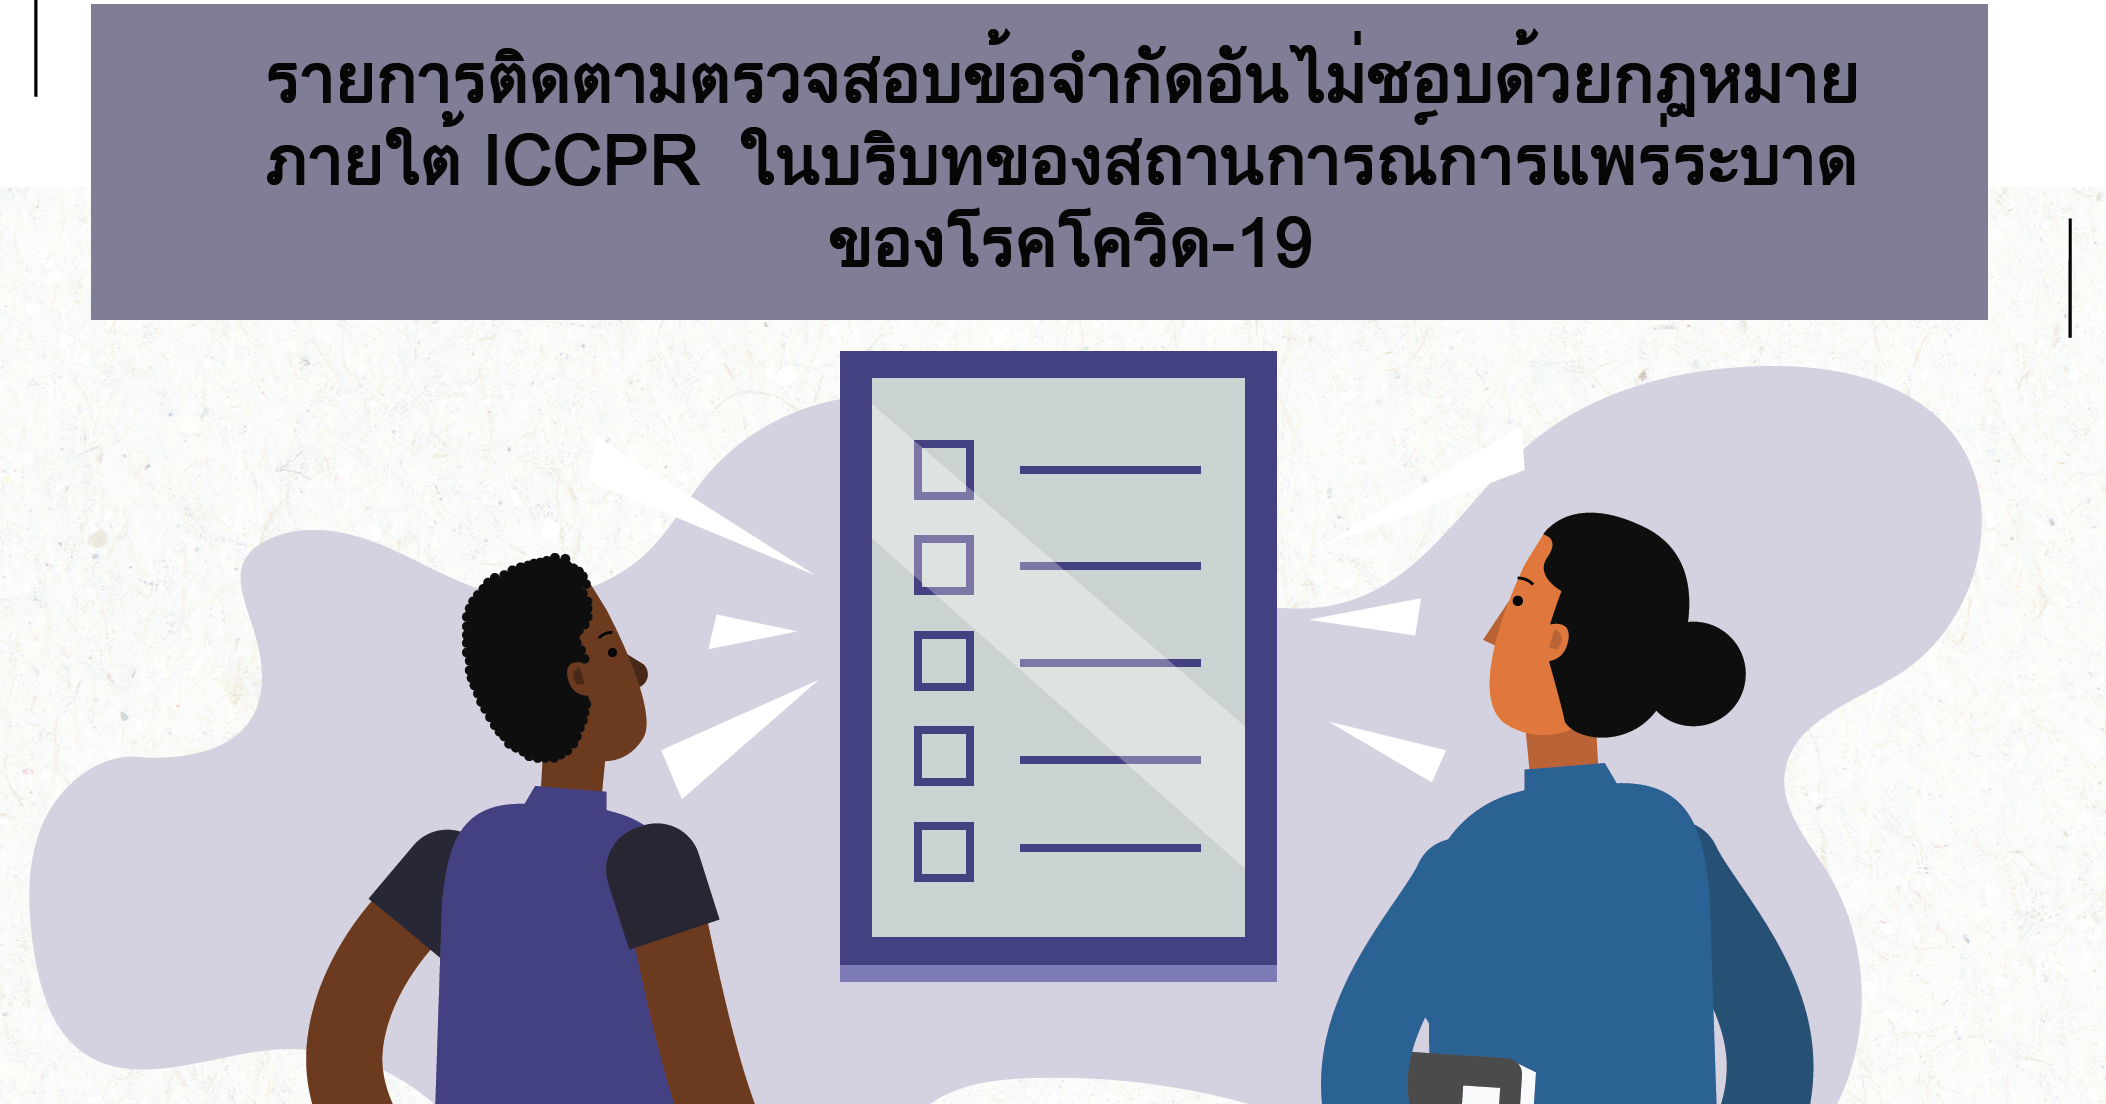 Thailand: tools to monitor risks of ICCPR violations in the context of COVID-19 pandemic, now available in Thai